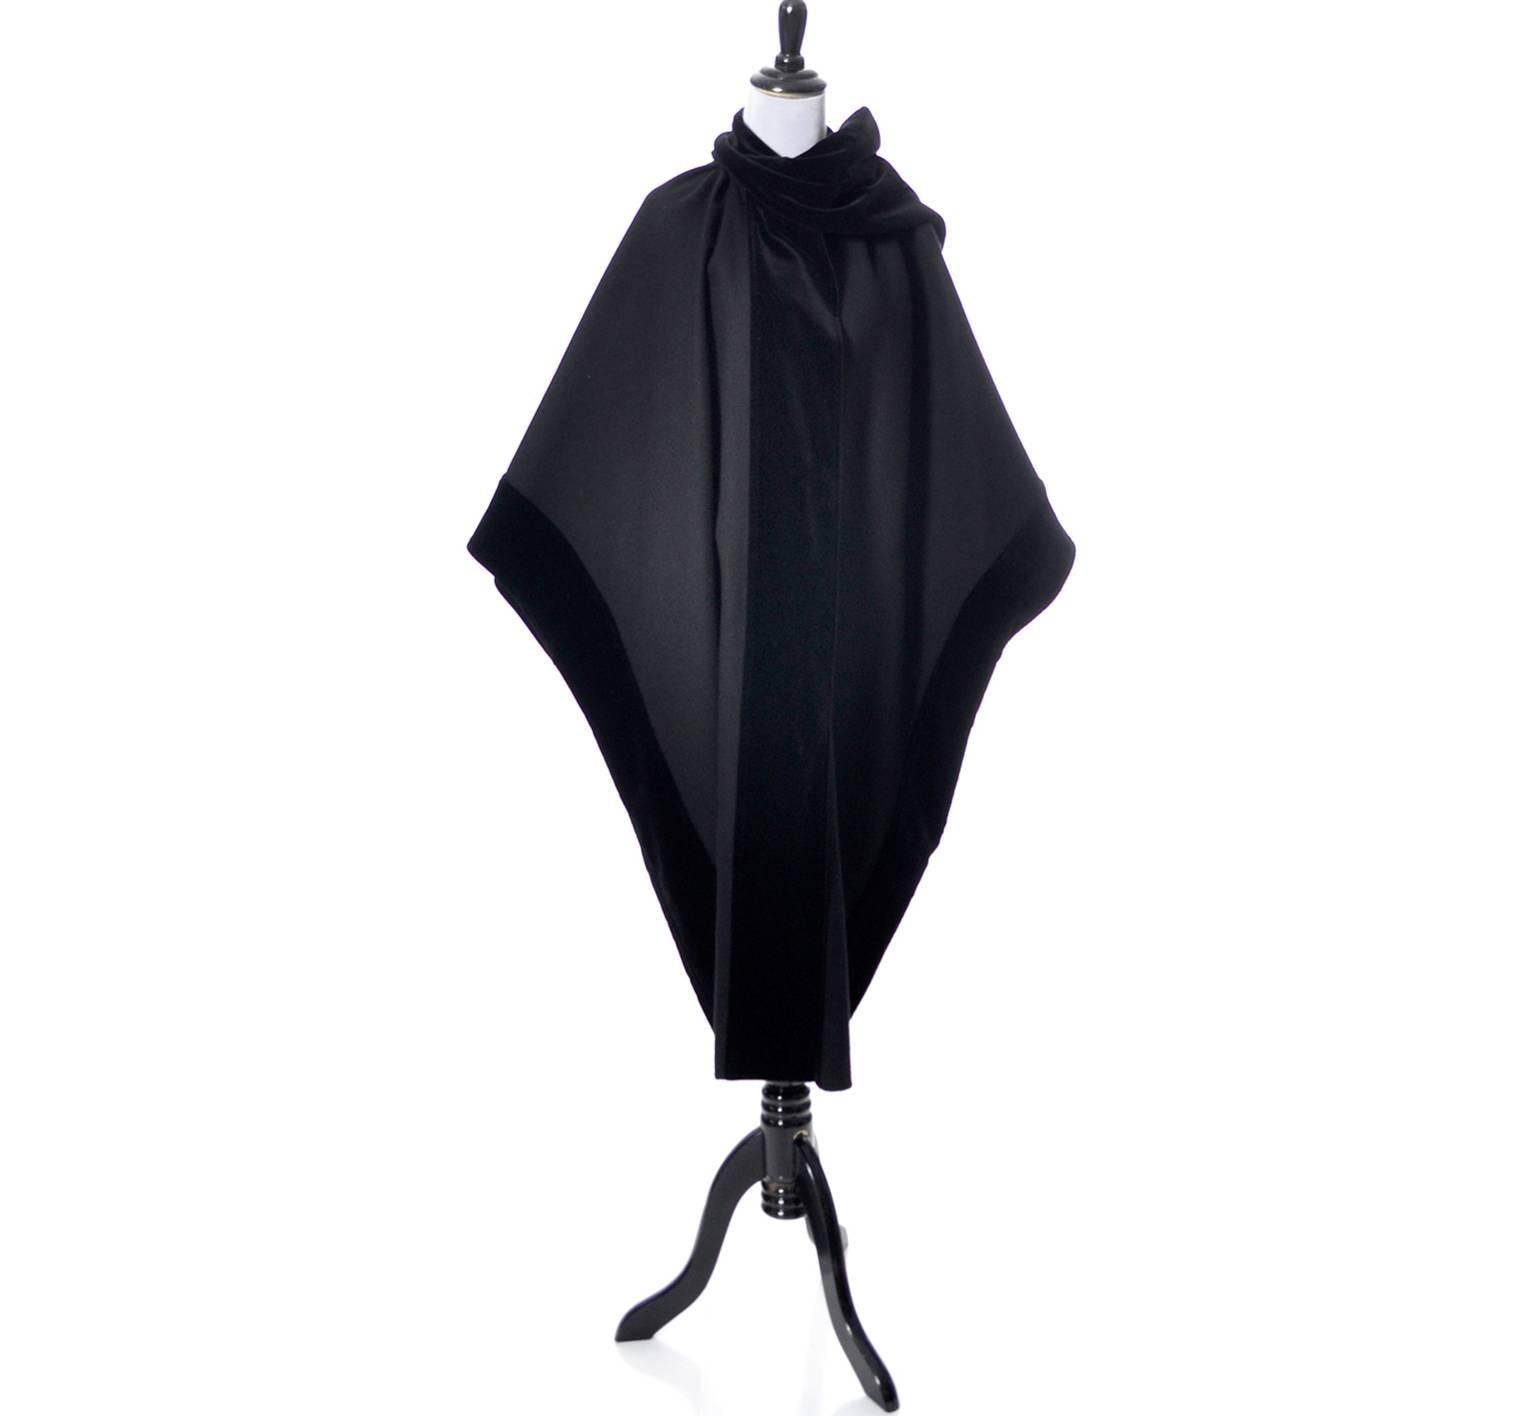 This is a sensational vintage cape from Ferragamo in black wool with black velvet trim.  I love the way the velvet wraps around the neck like a scarf on one side.  Though this is shaped like a cape, it does actually have wide sleeves.  The cape is